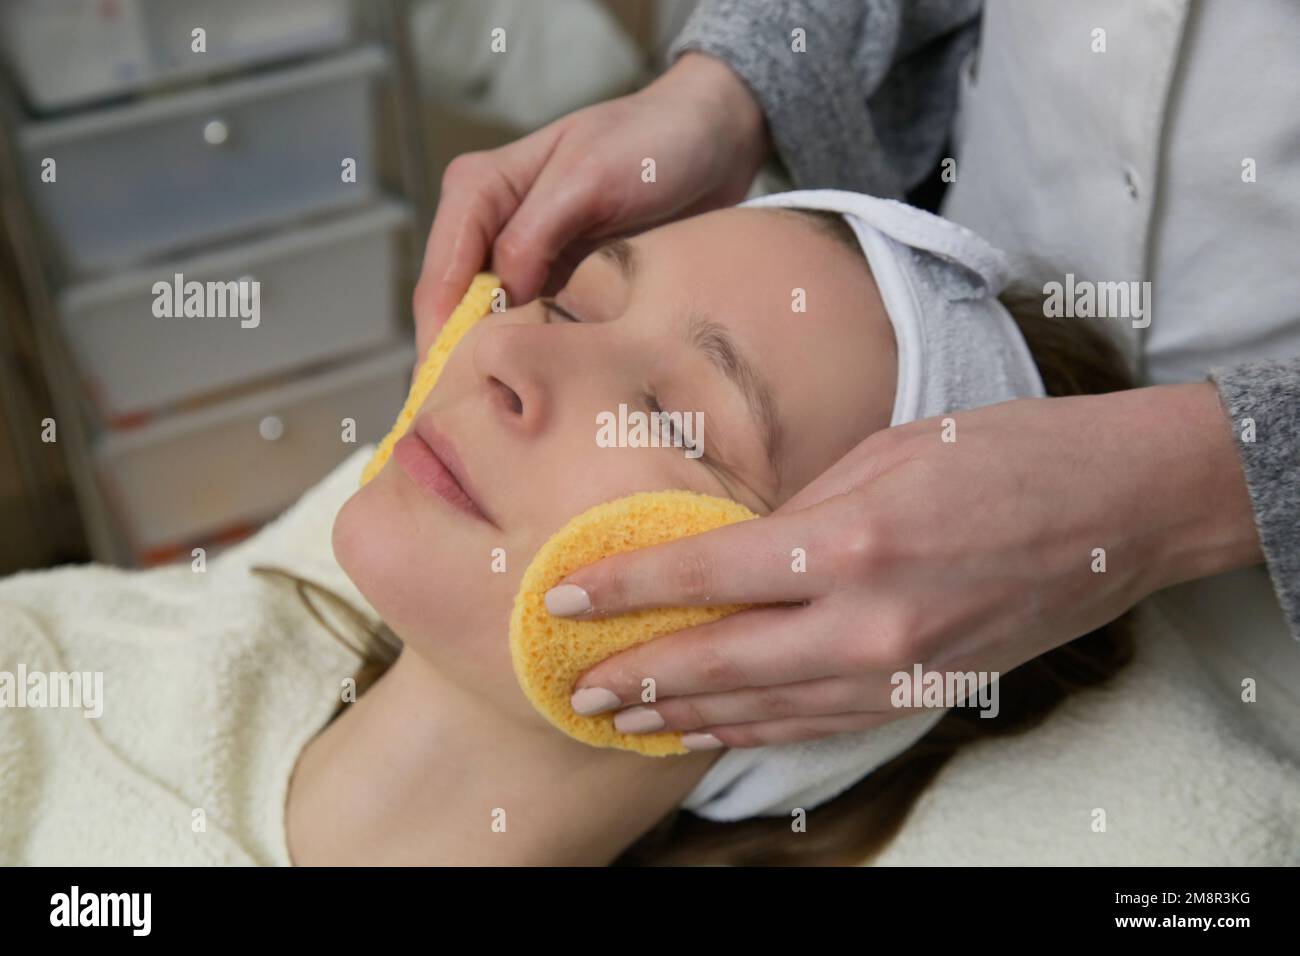 Dermatologist preparing woman's face skin for treatment. Process of cleaning, peeling and exfoliation. Stock Photo